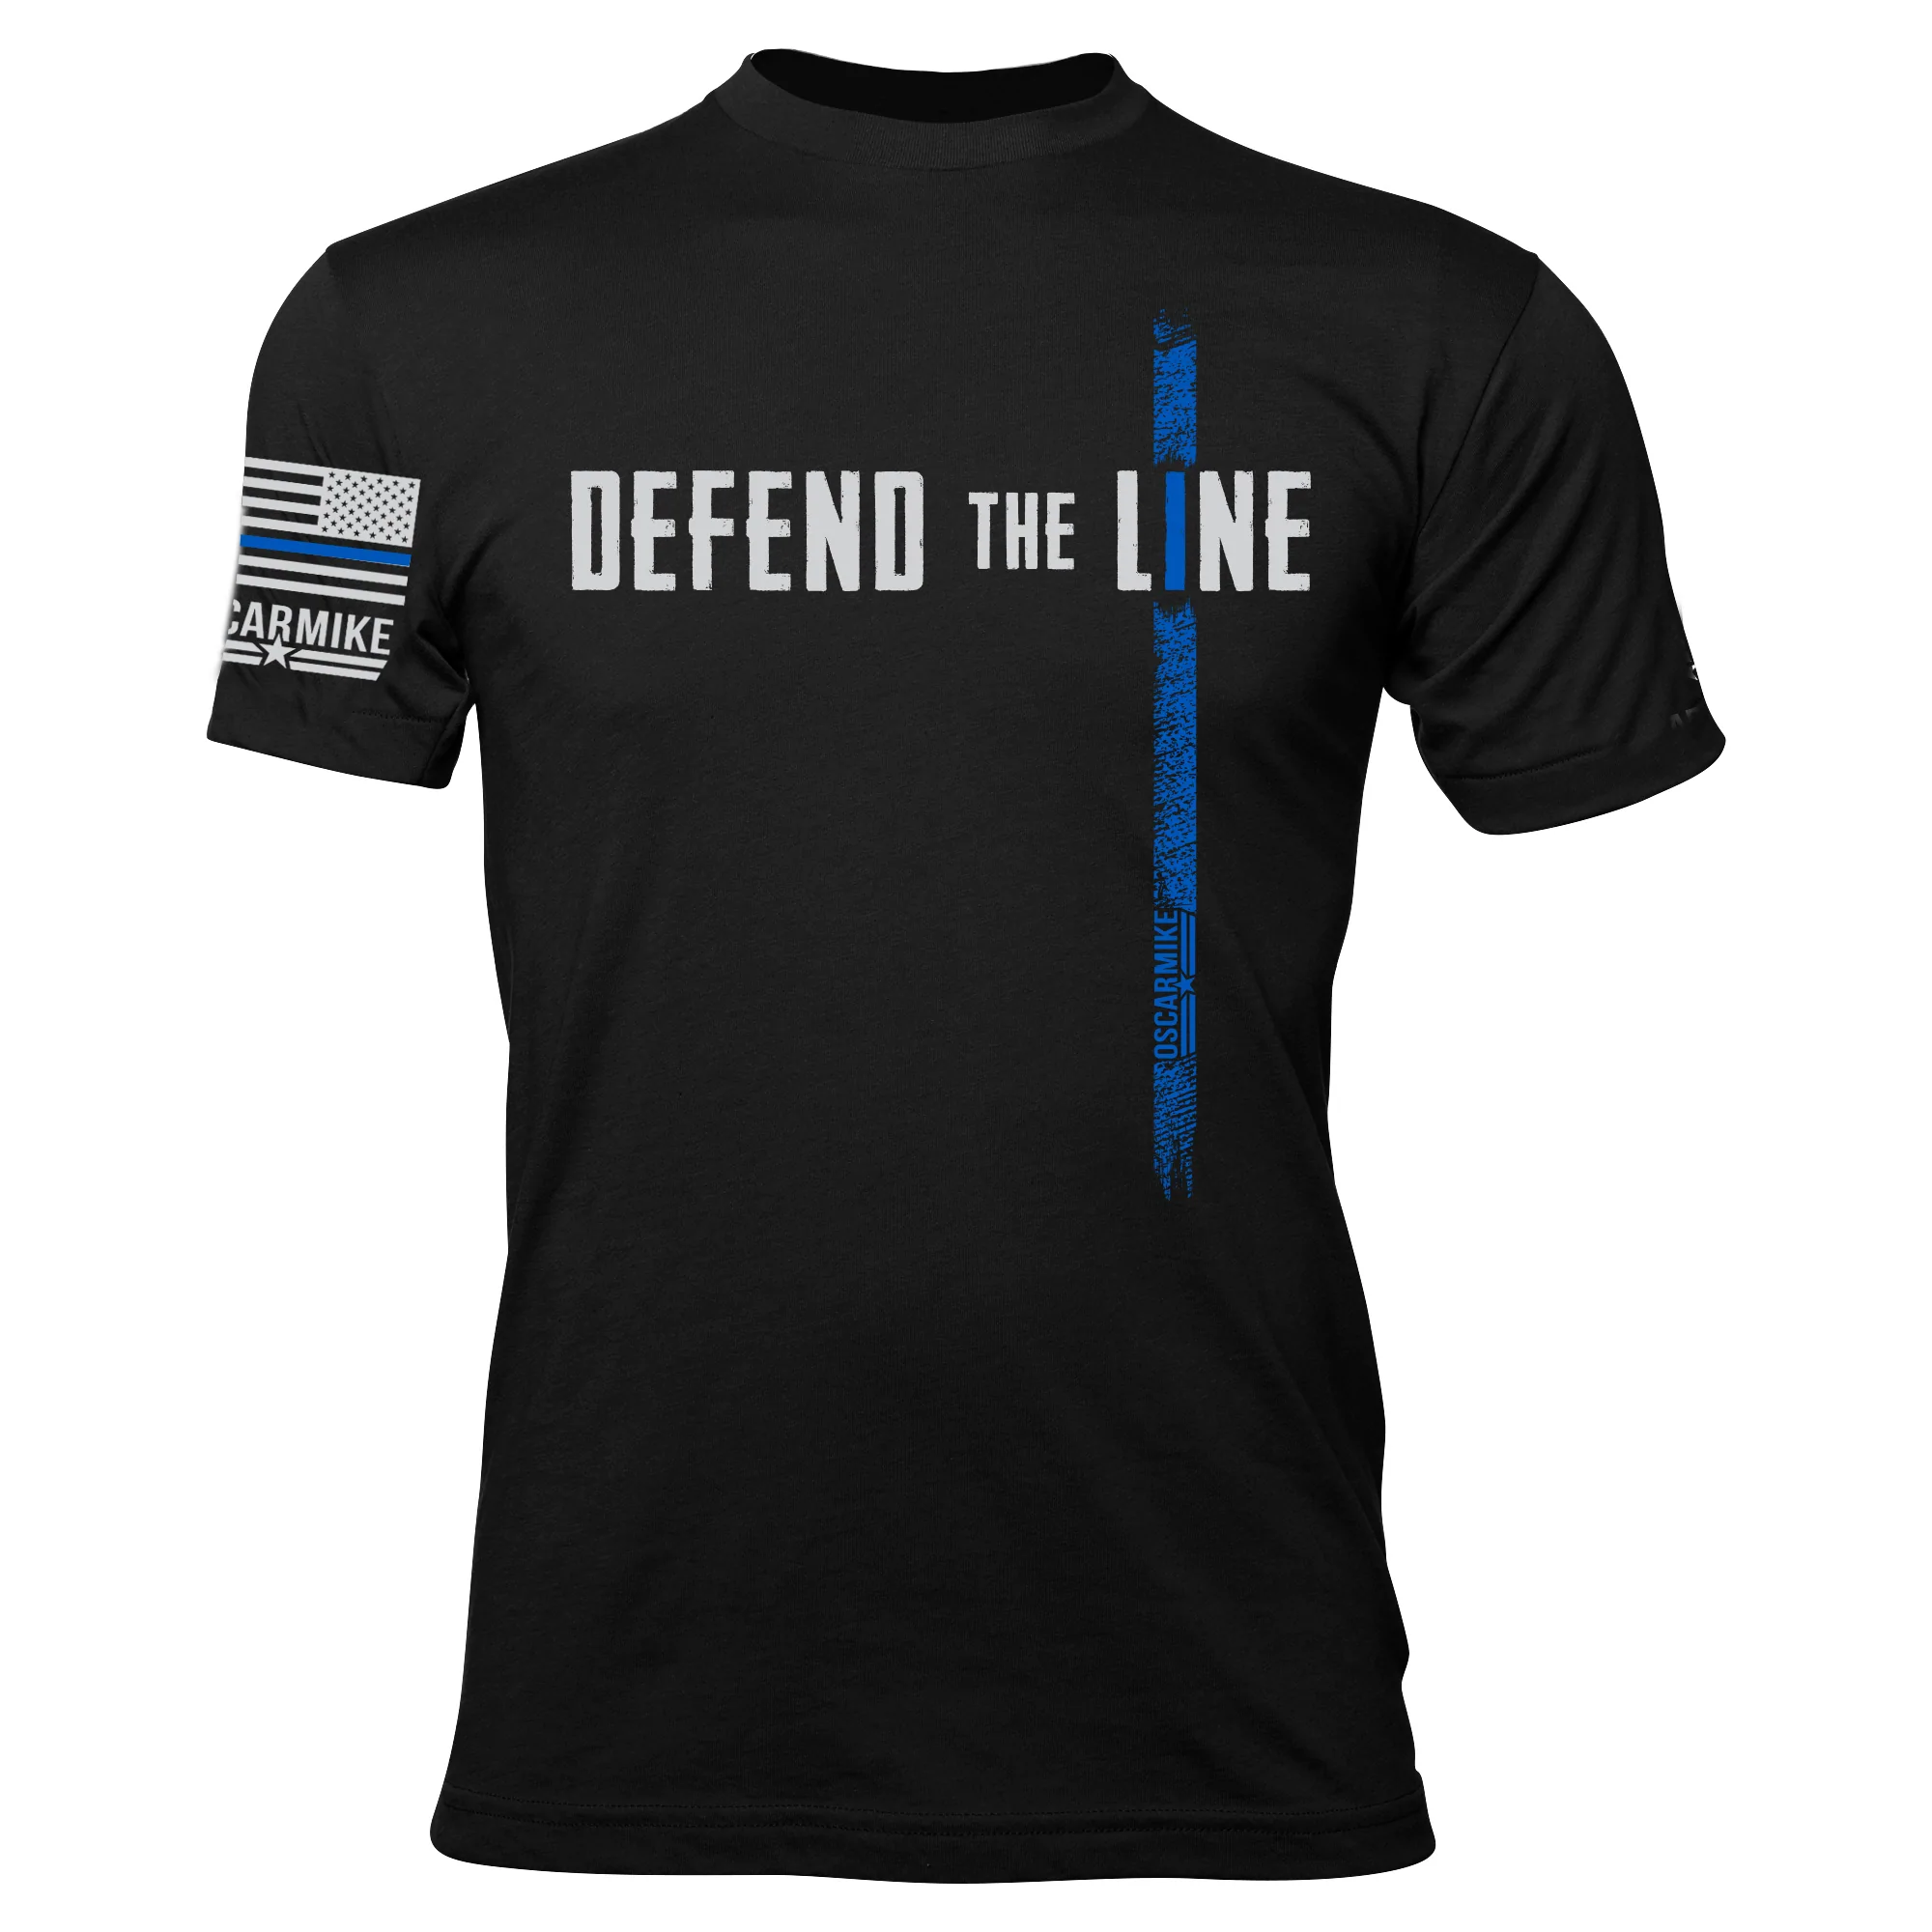 Oscar Mike Men's Defend The Line Tee posted by ProdOrigin USA in Men's Apparel